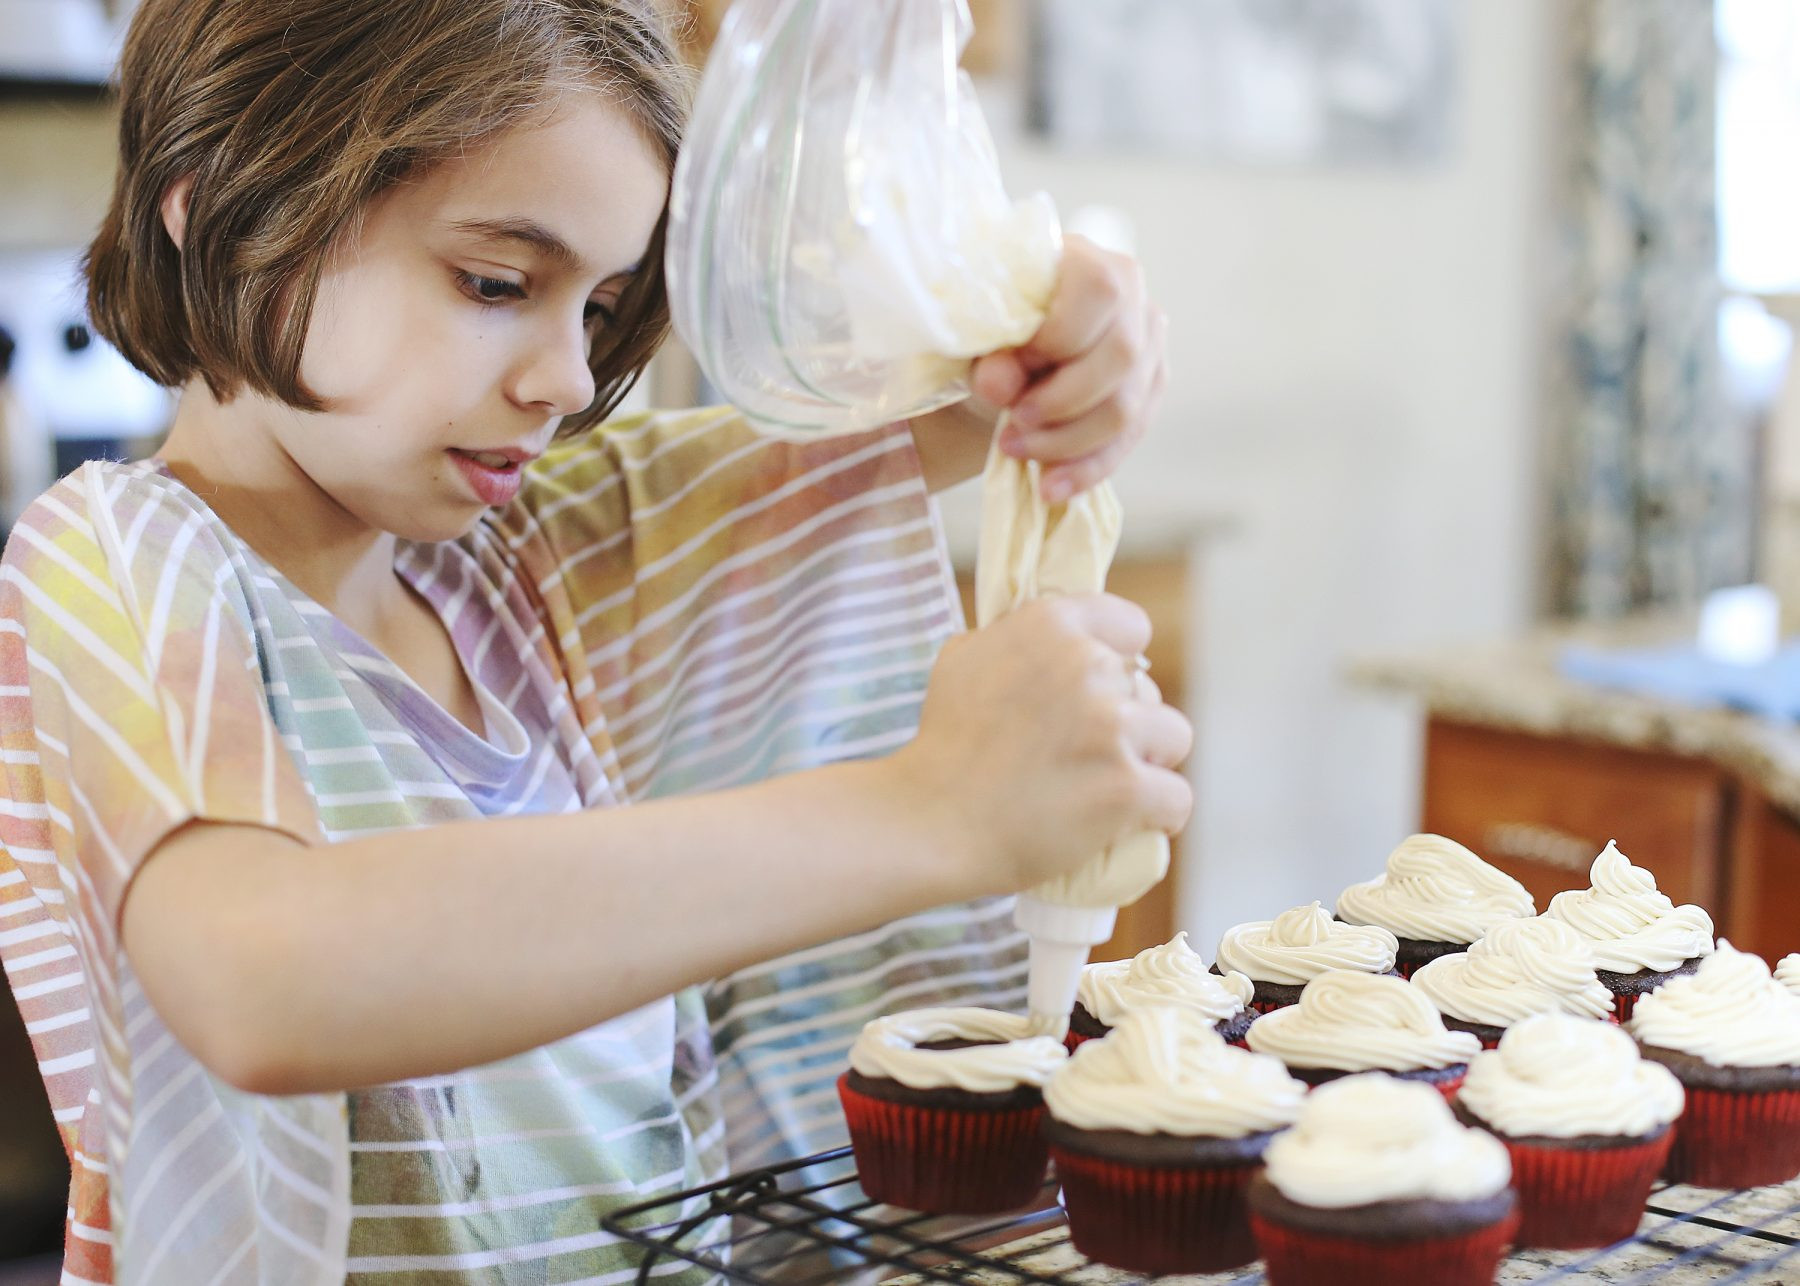 Kids Baking Championship Recipes
 Look for this 11 year old Aurora baker on Food Network s